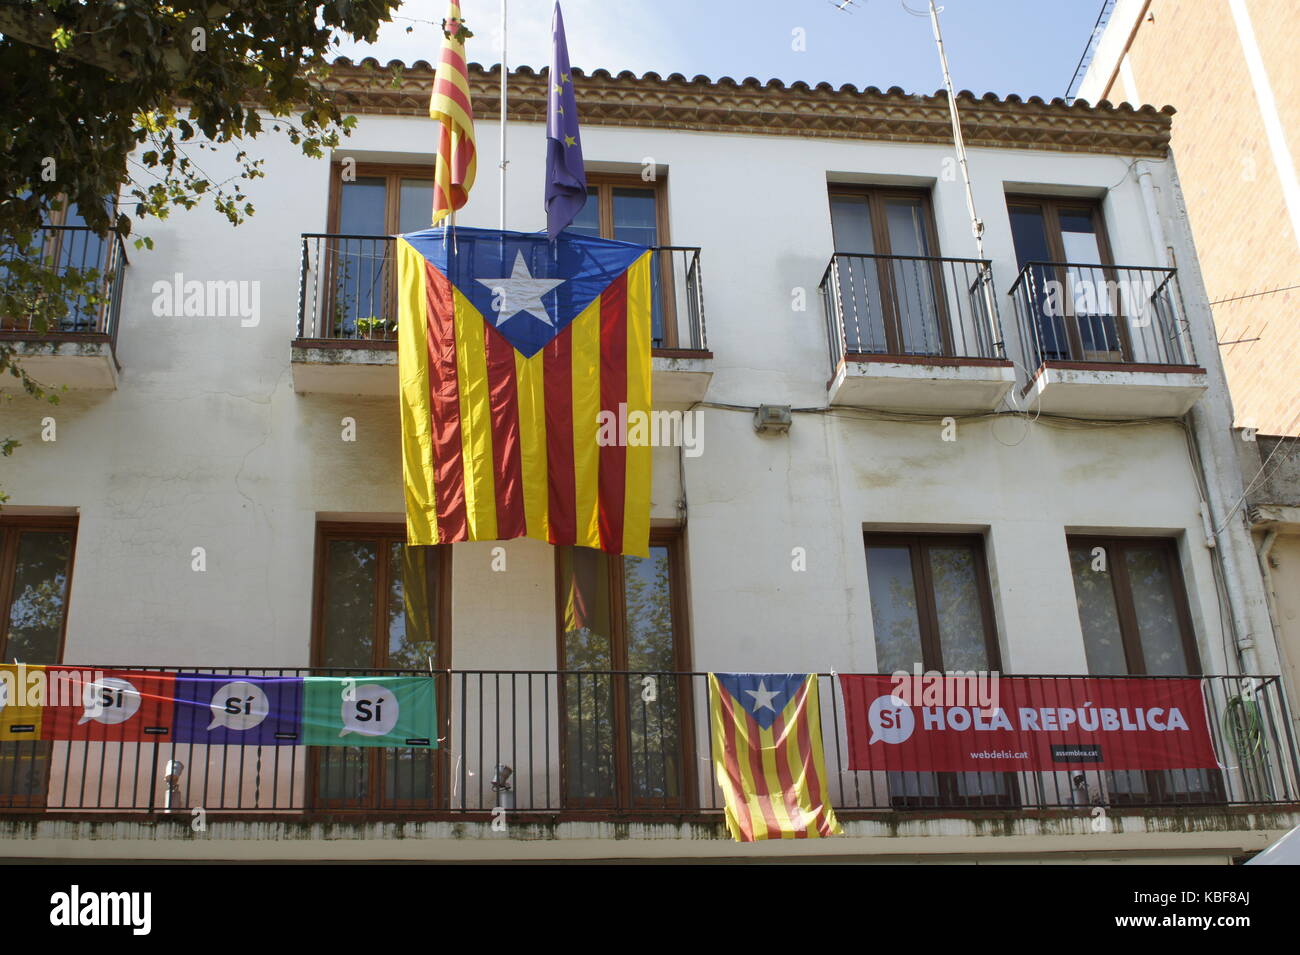 The 'Estelada', the flag of the Catalan independence movement, and the European flag are hoisted at the city hall in Arenys de Munt, Spain 24 September 2017. The Spanish flag has been taken down. The clock is ticking: On Sunday, Catalonia wants to vote on their independency. Photo: Carola Frentzen/dpa Stock Photo